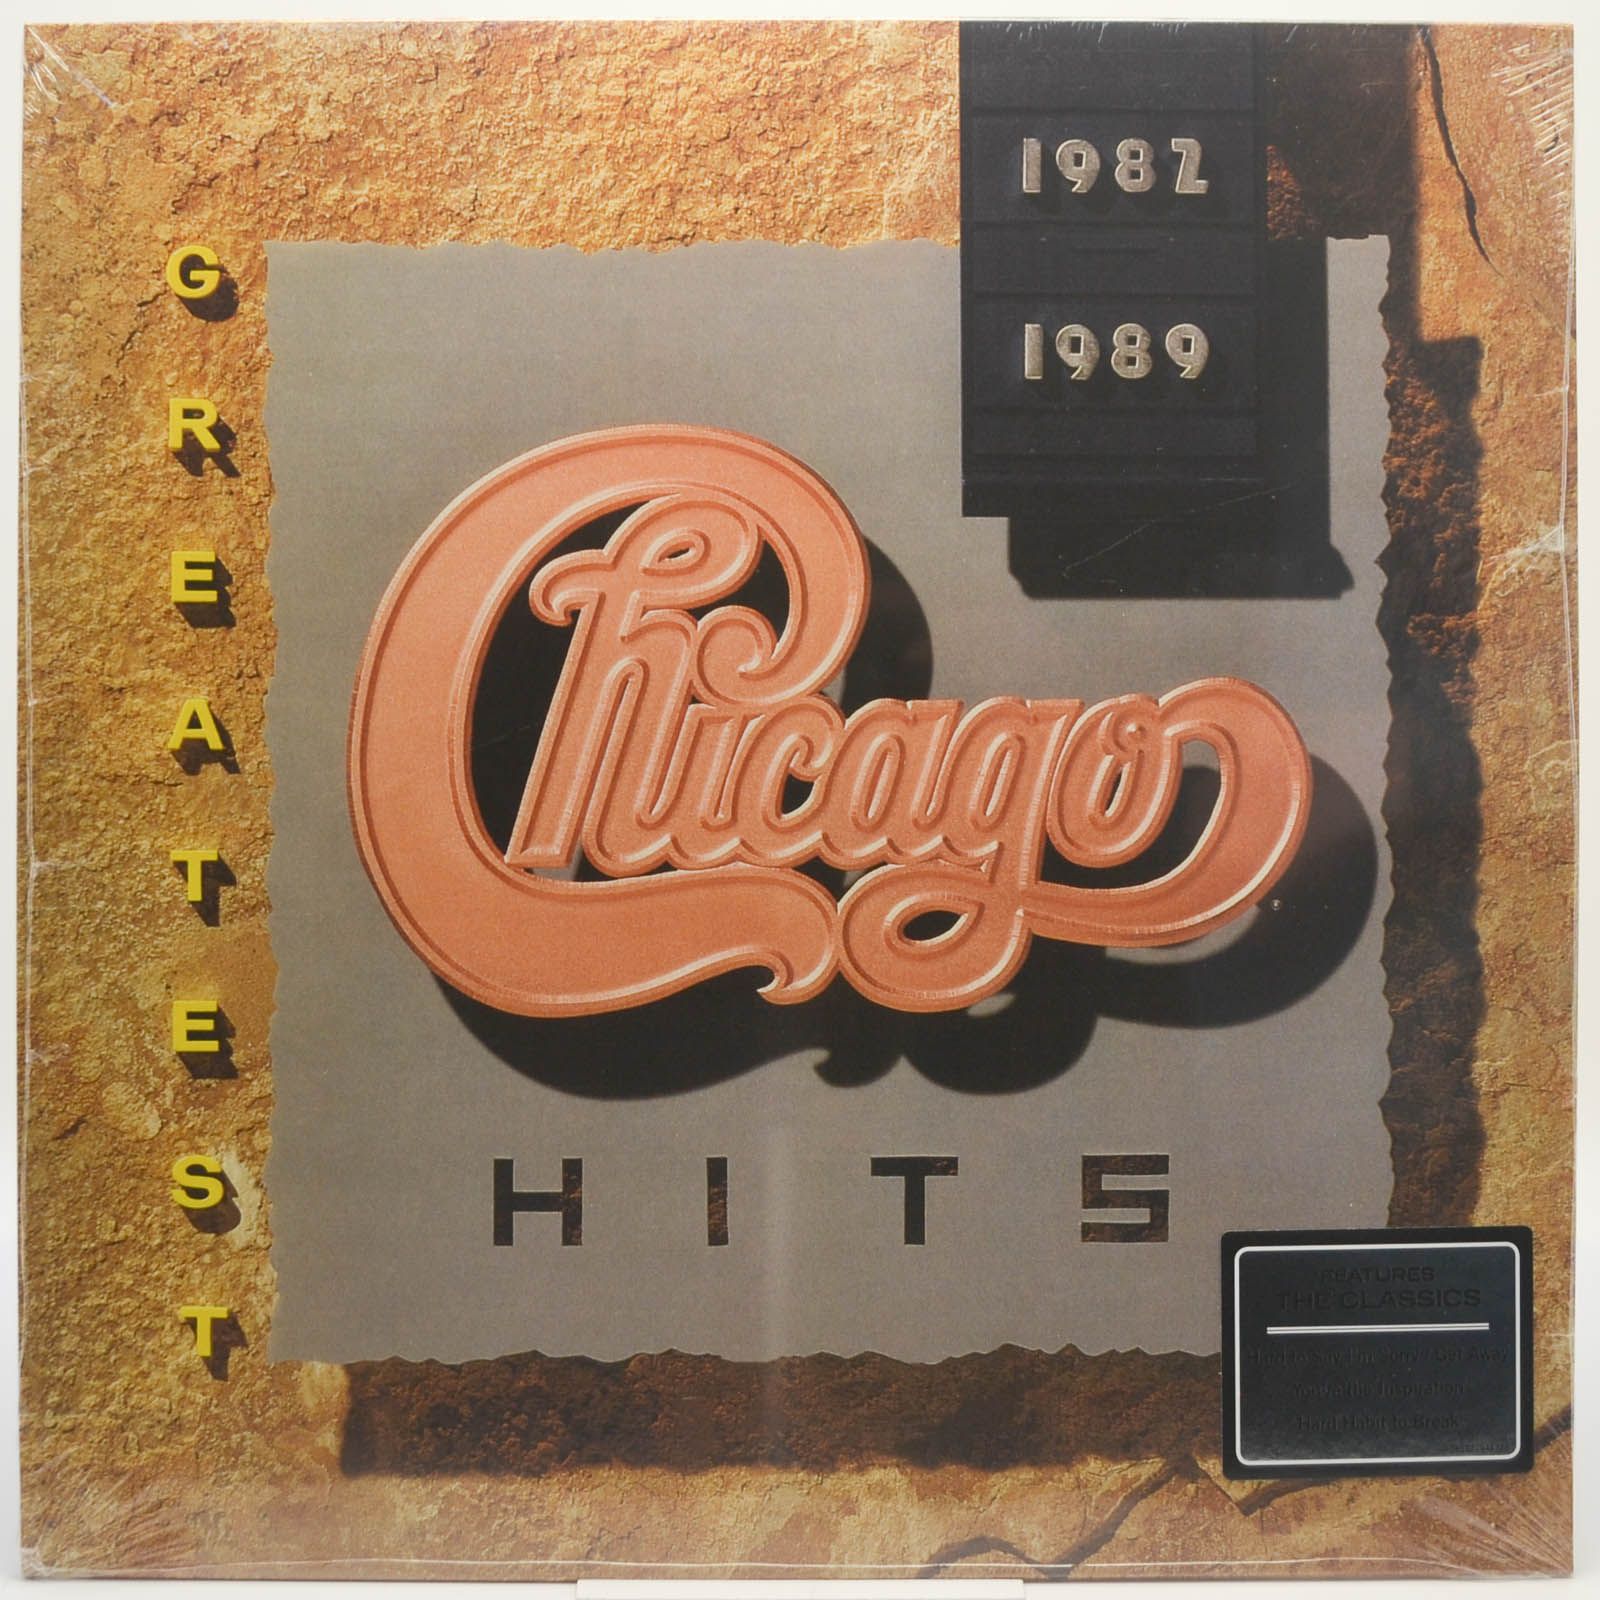 Chicago — Greatest Hits 1982-1989, 1989